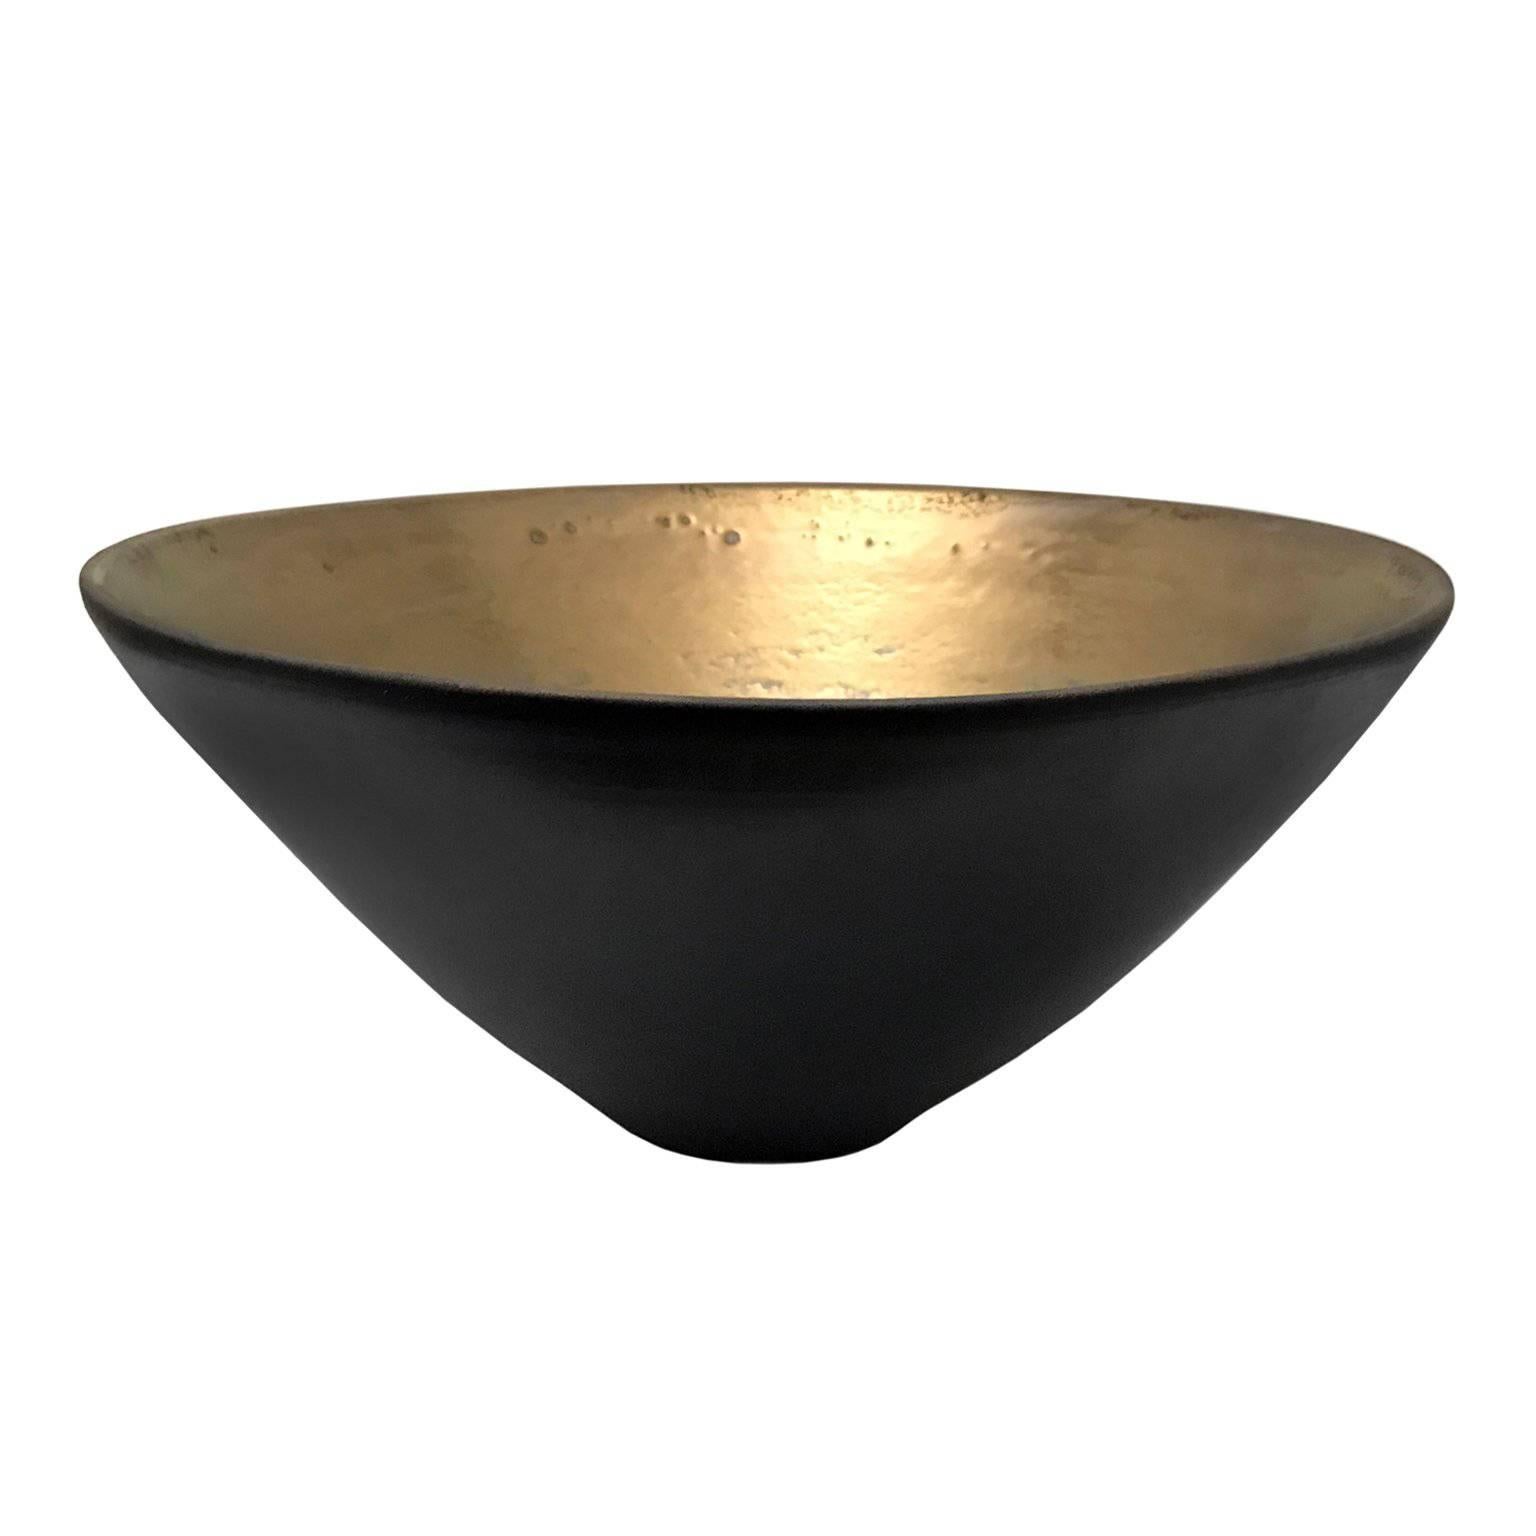 Large Black Ceramic Bowl with Gold Glaze Interior and Pointed Base